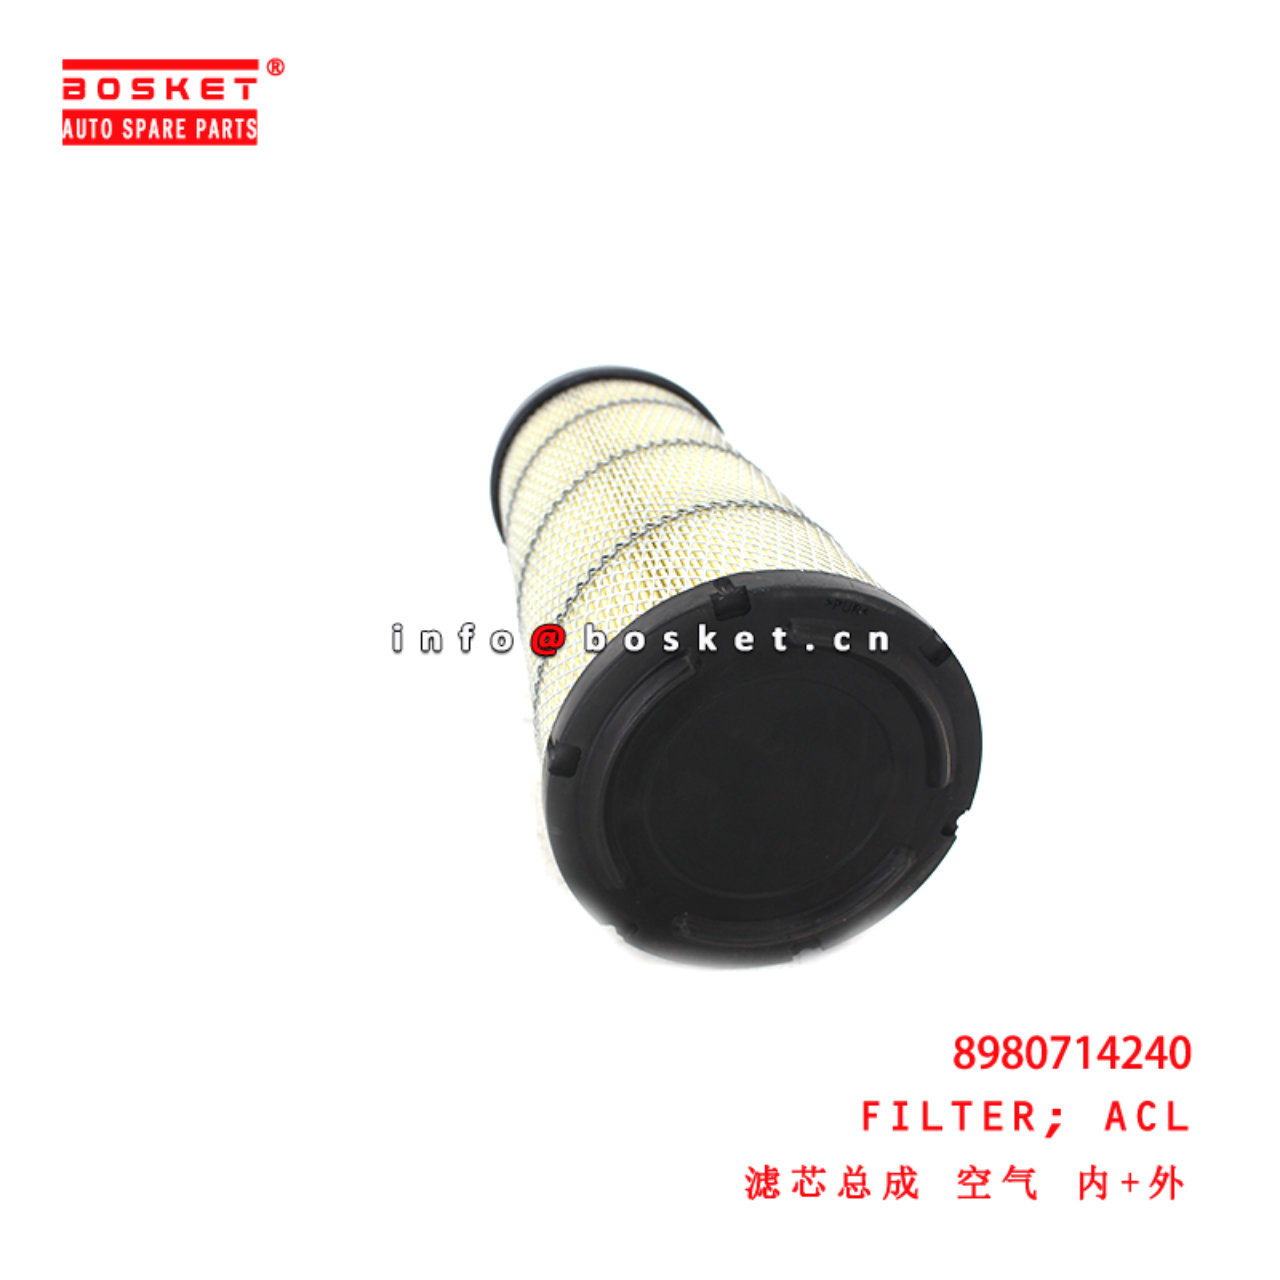 8-98071424-0 Air Cleaner Filter suitable for ISUZU FVM GVR 6HK1 8980714240